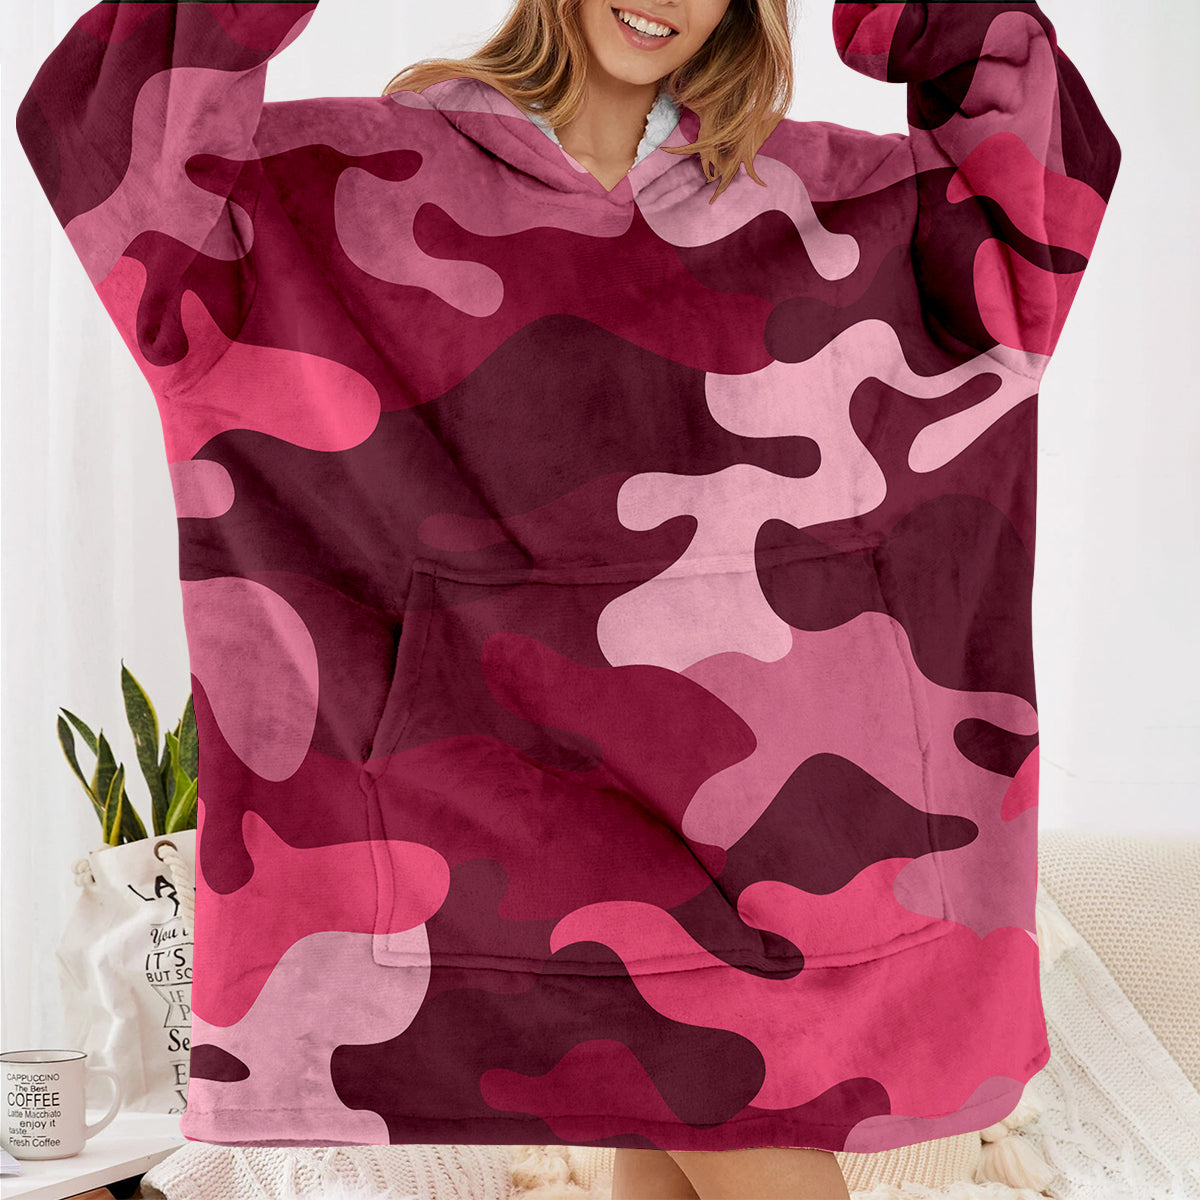 Military Camouflage Red Designed Blanket Hoodies